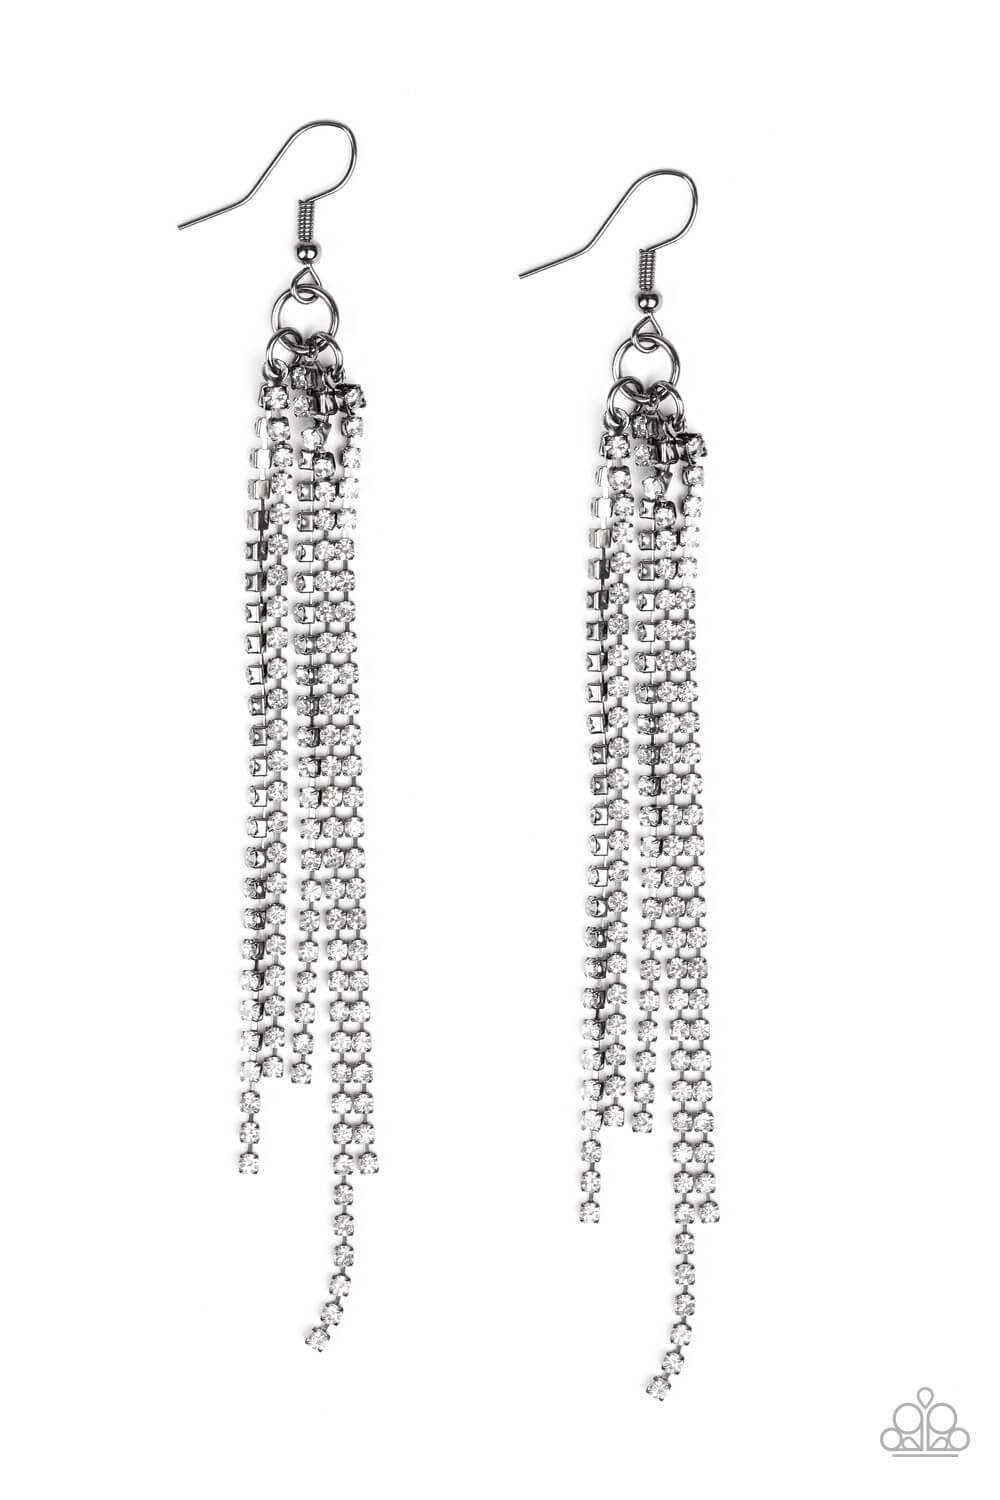 Center Stage Status Black Life of the Party Exclusive Earrings - Princess Glam Shop